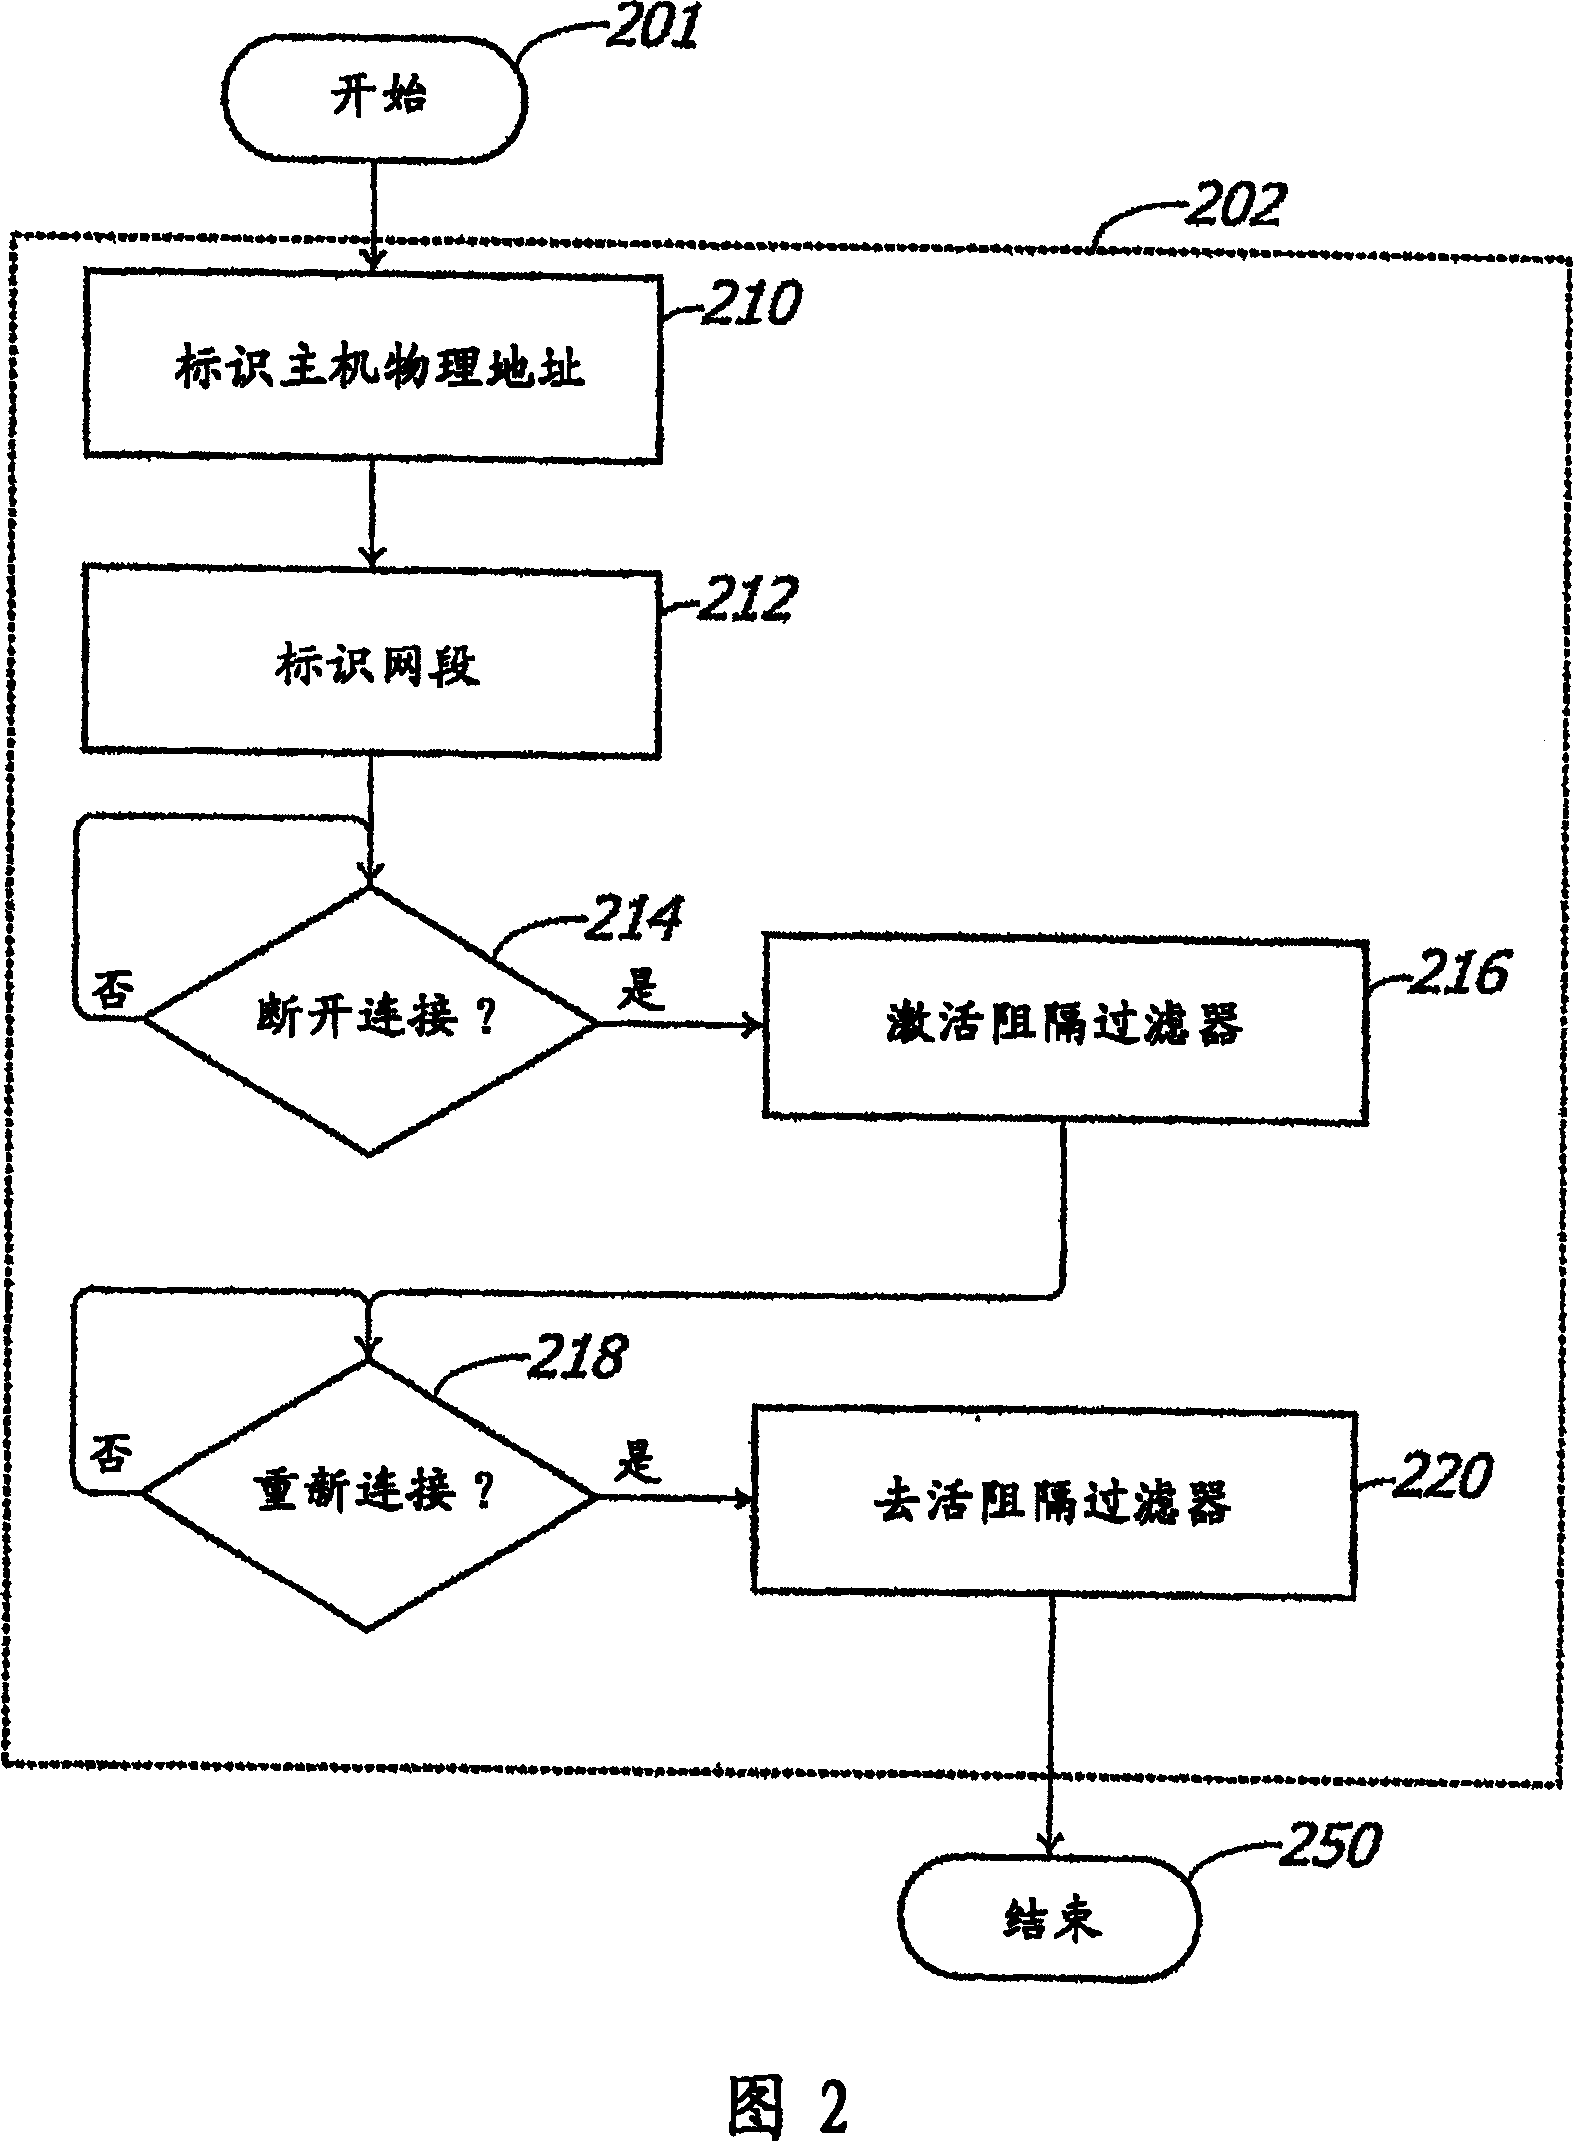 Automated network blocking method and system